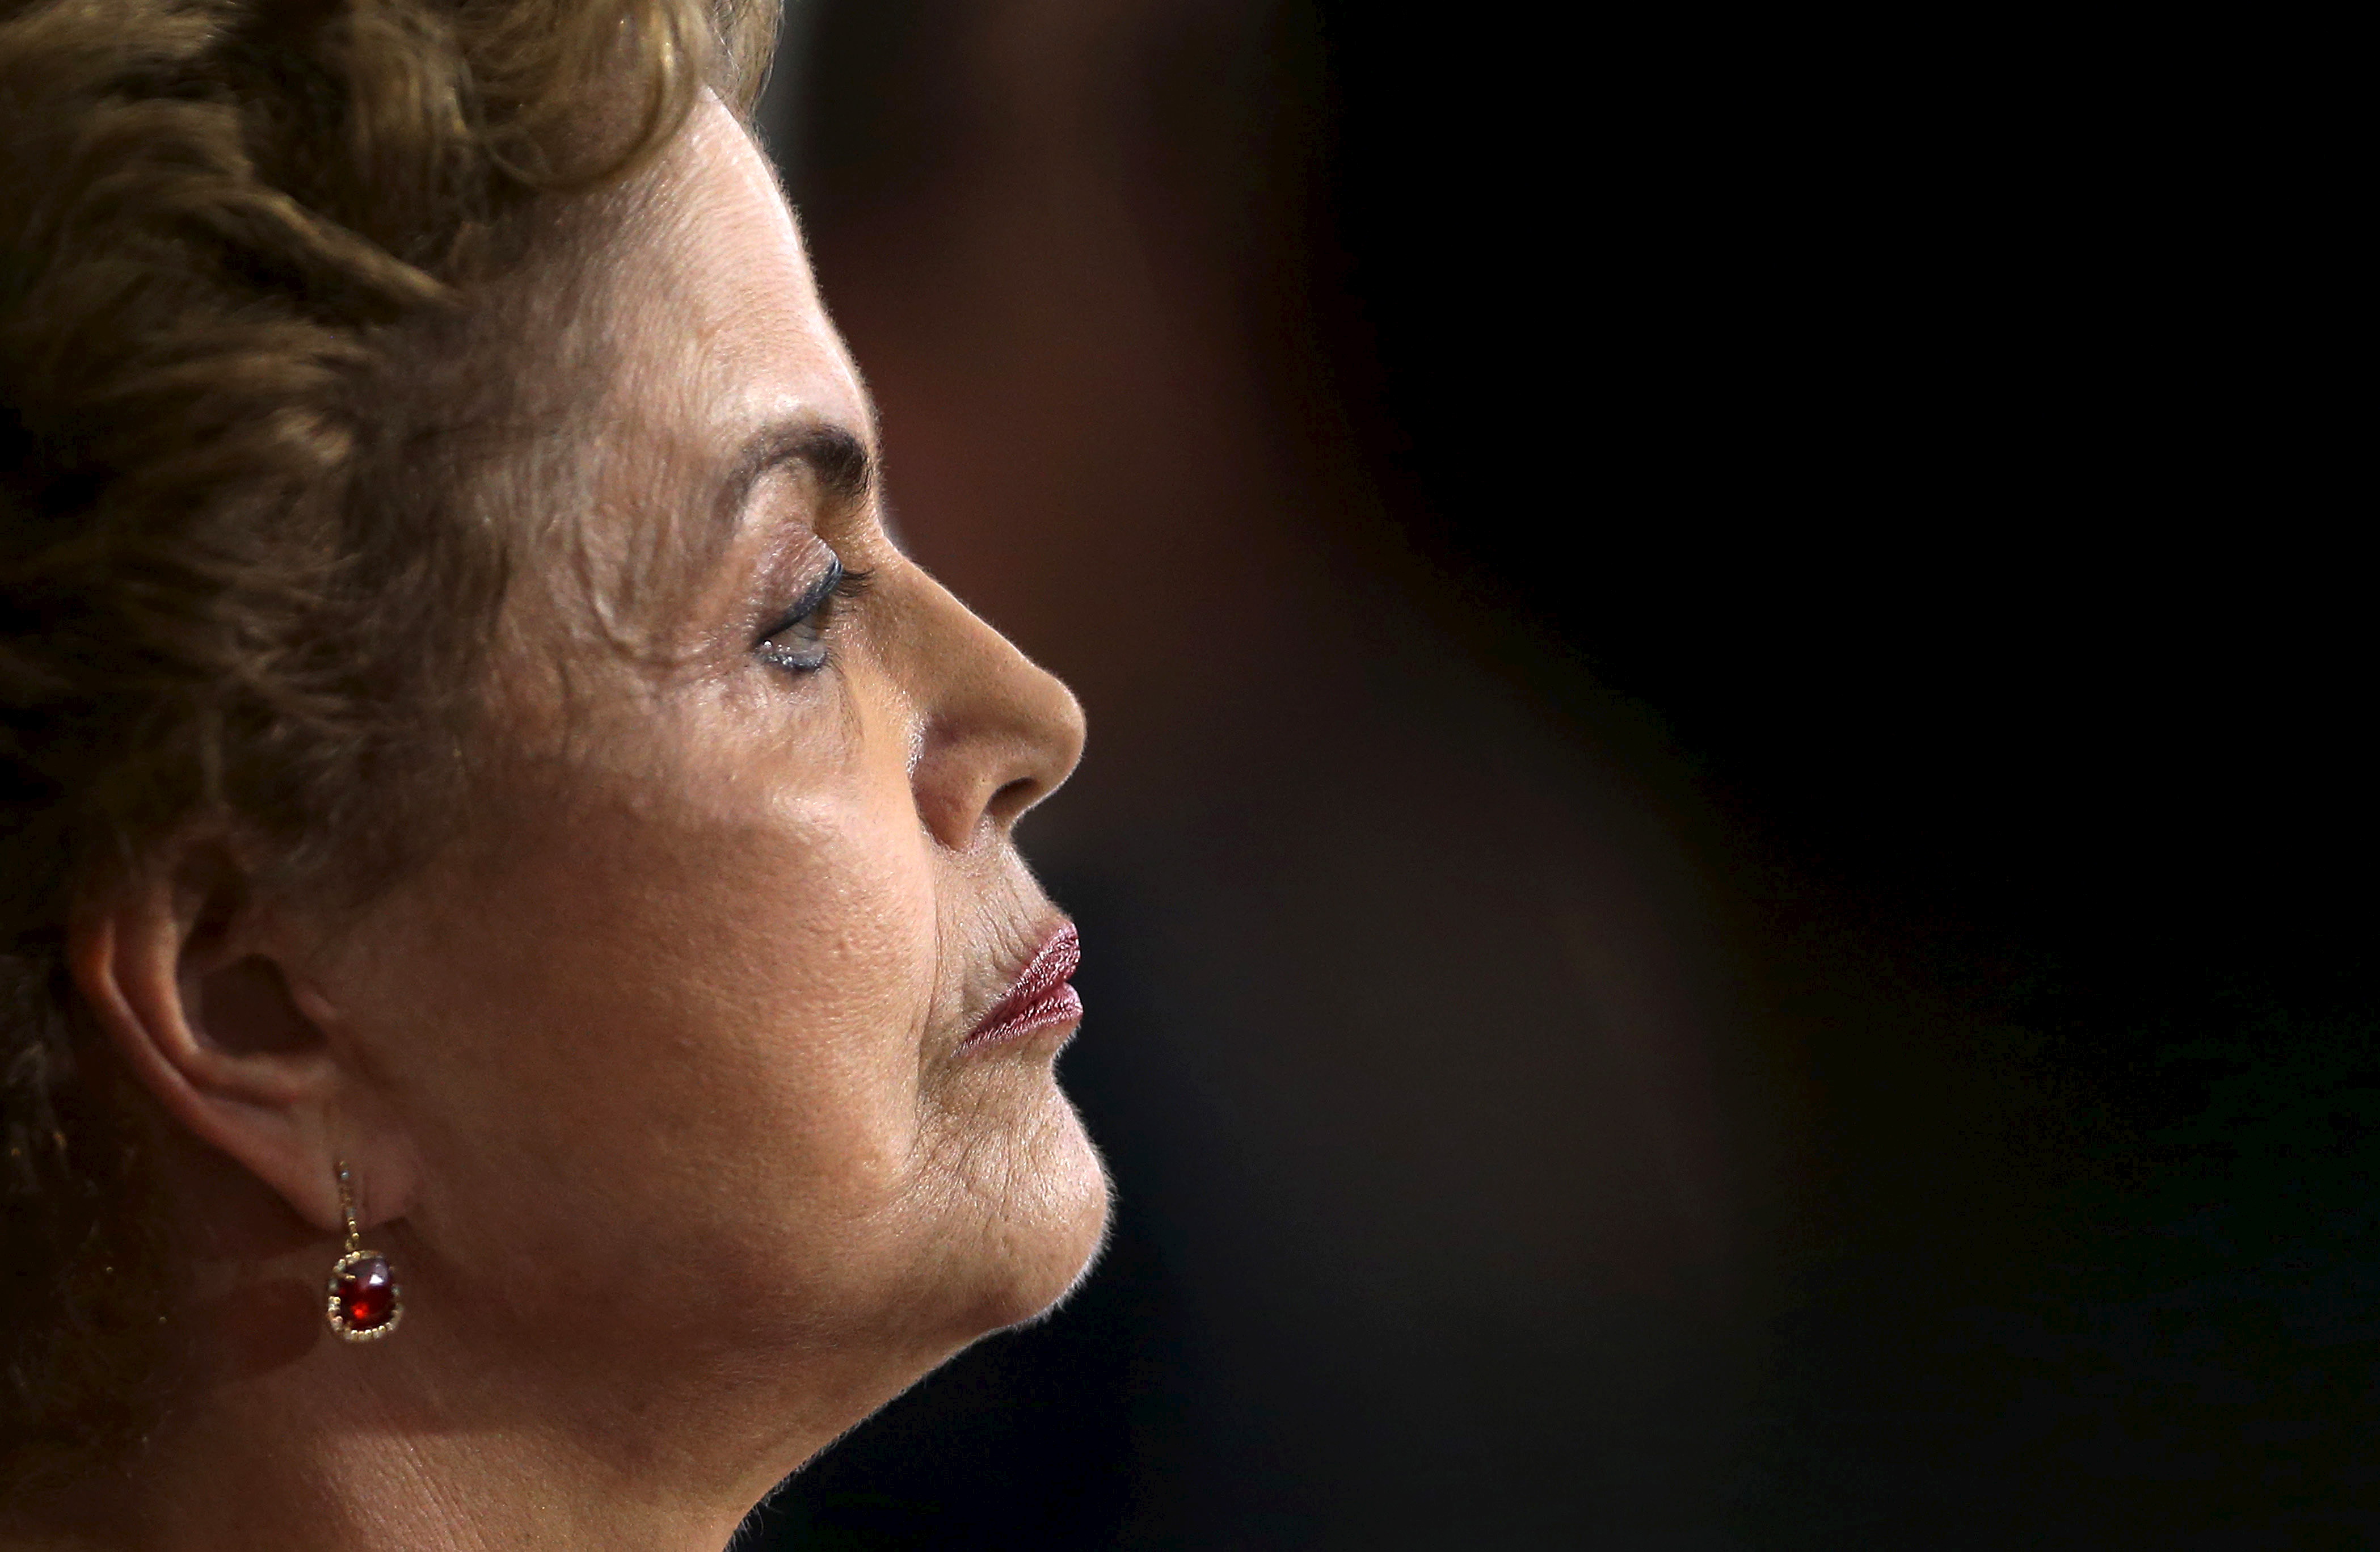 Brazil's President Rousseff attends a news conference at the Planalto Palace in Brasilia